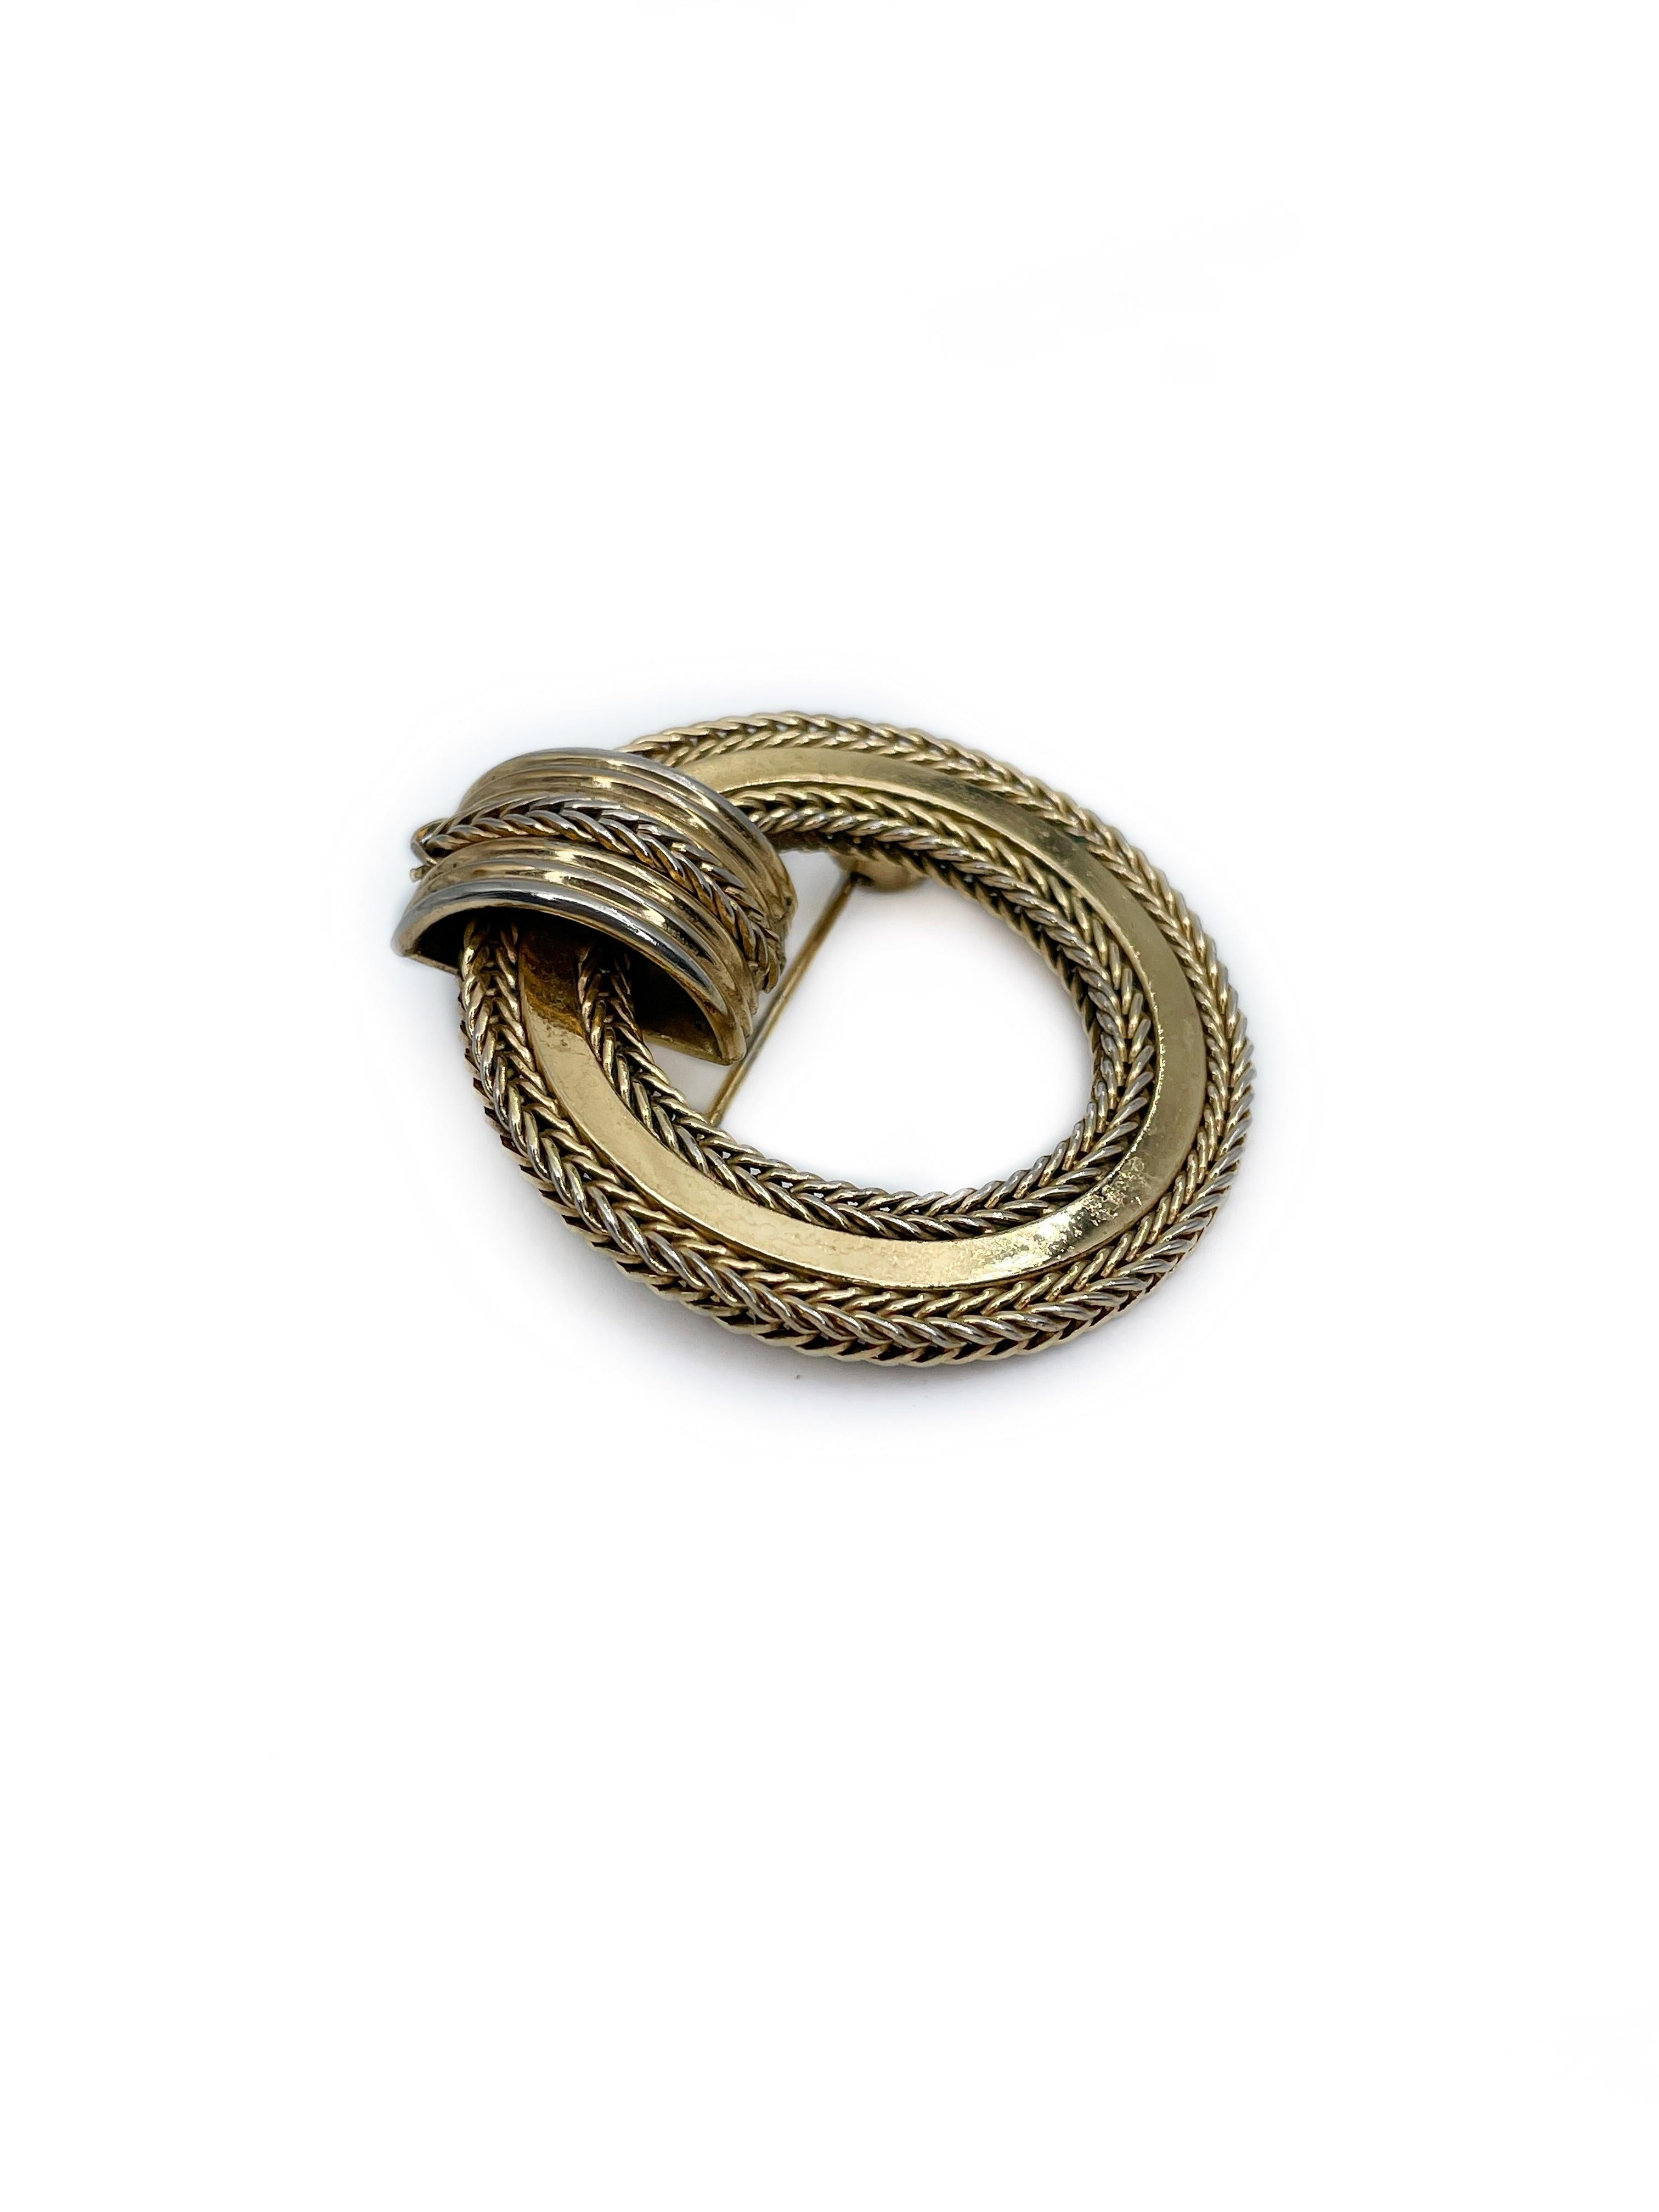 This is a minimalistic design round chain brooch designed by Christian Dior. The piece is gold plated. It is made in 1958. 

Markings: “Chr. Dior © 1958” (shown in photos).

Size: 4x3.7cm